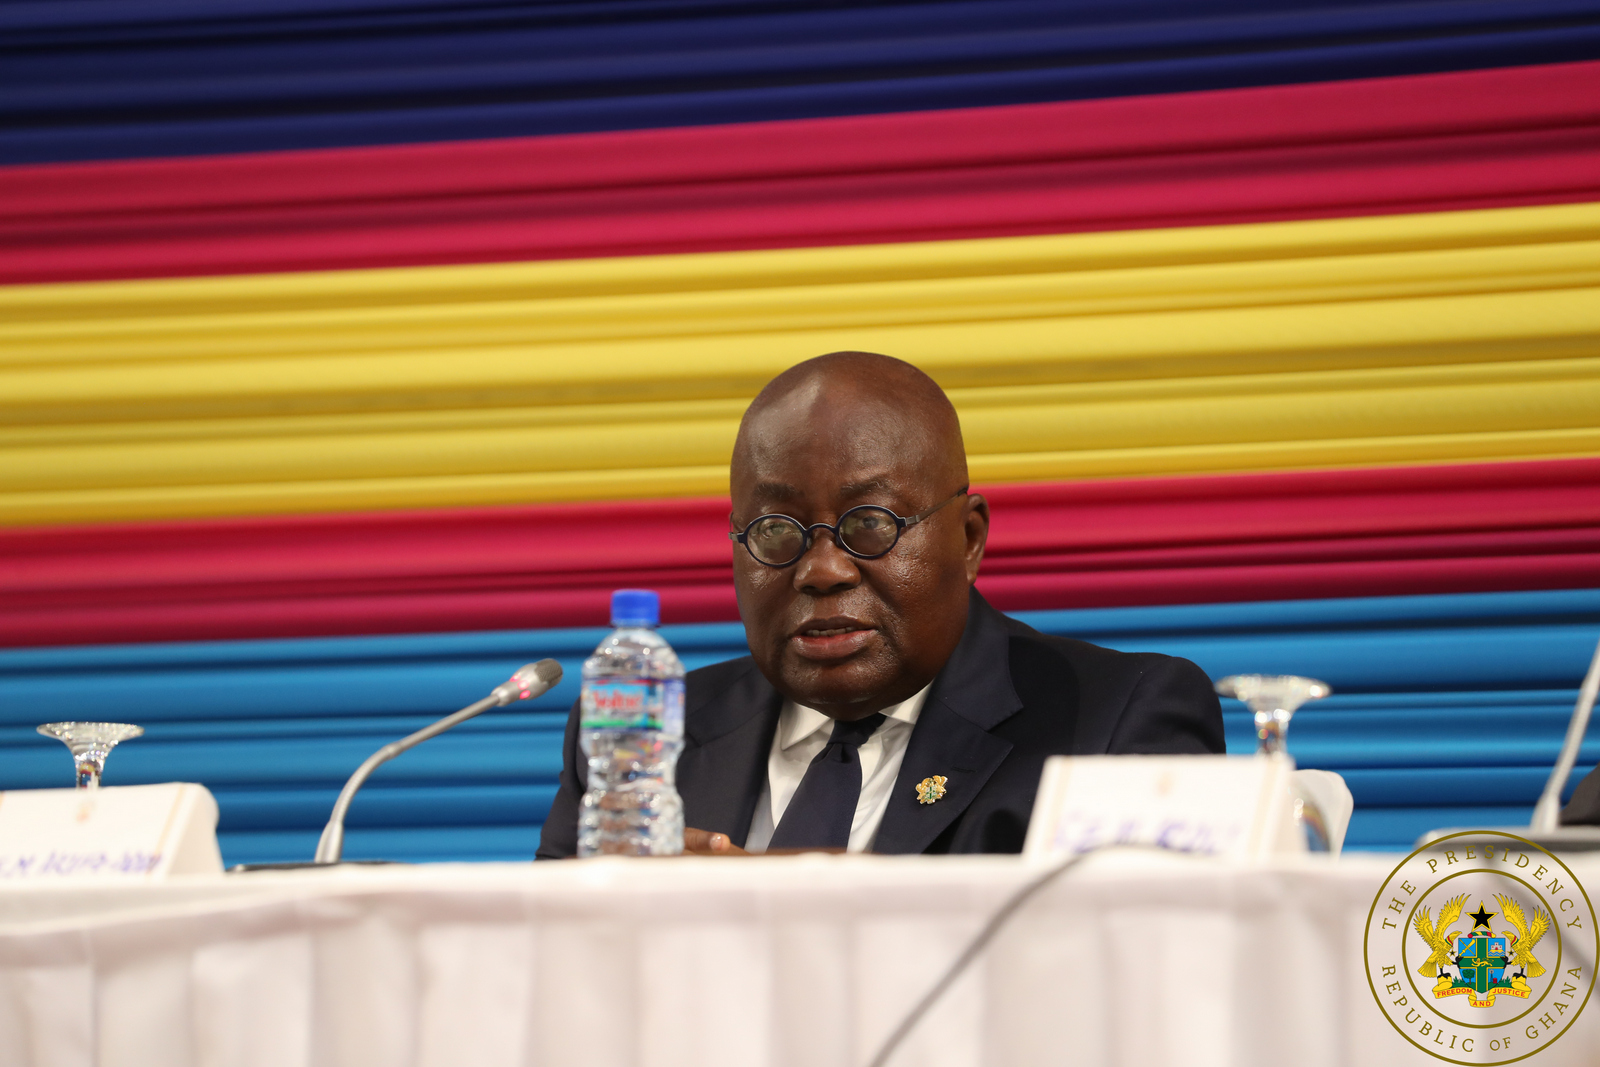 President Akufo-Addo speaking at the dialogue in Lome